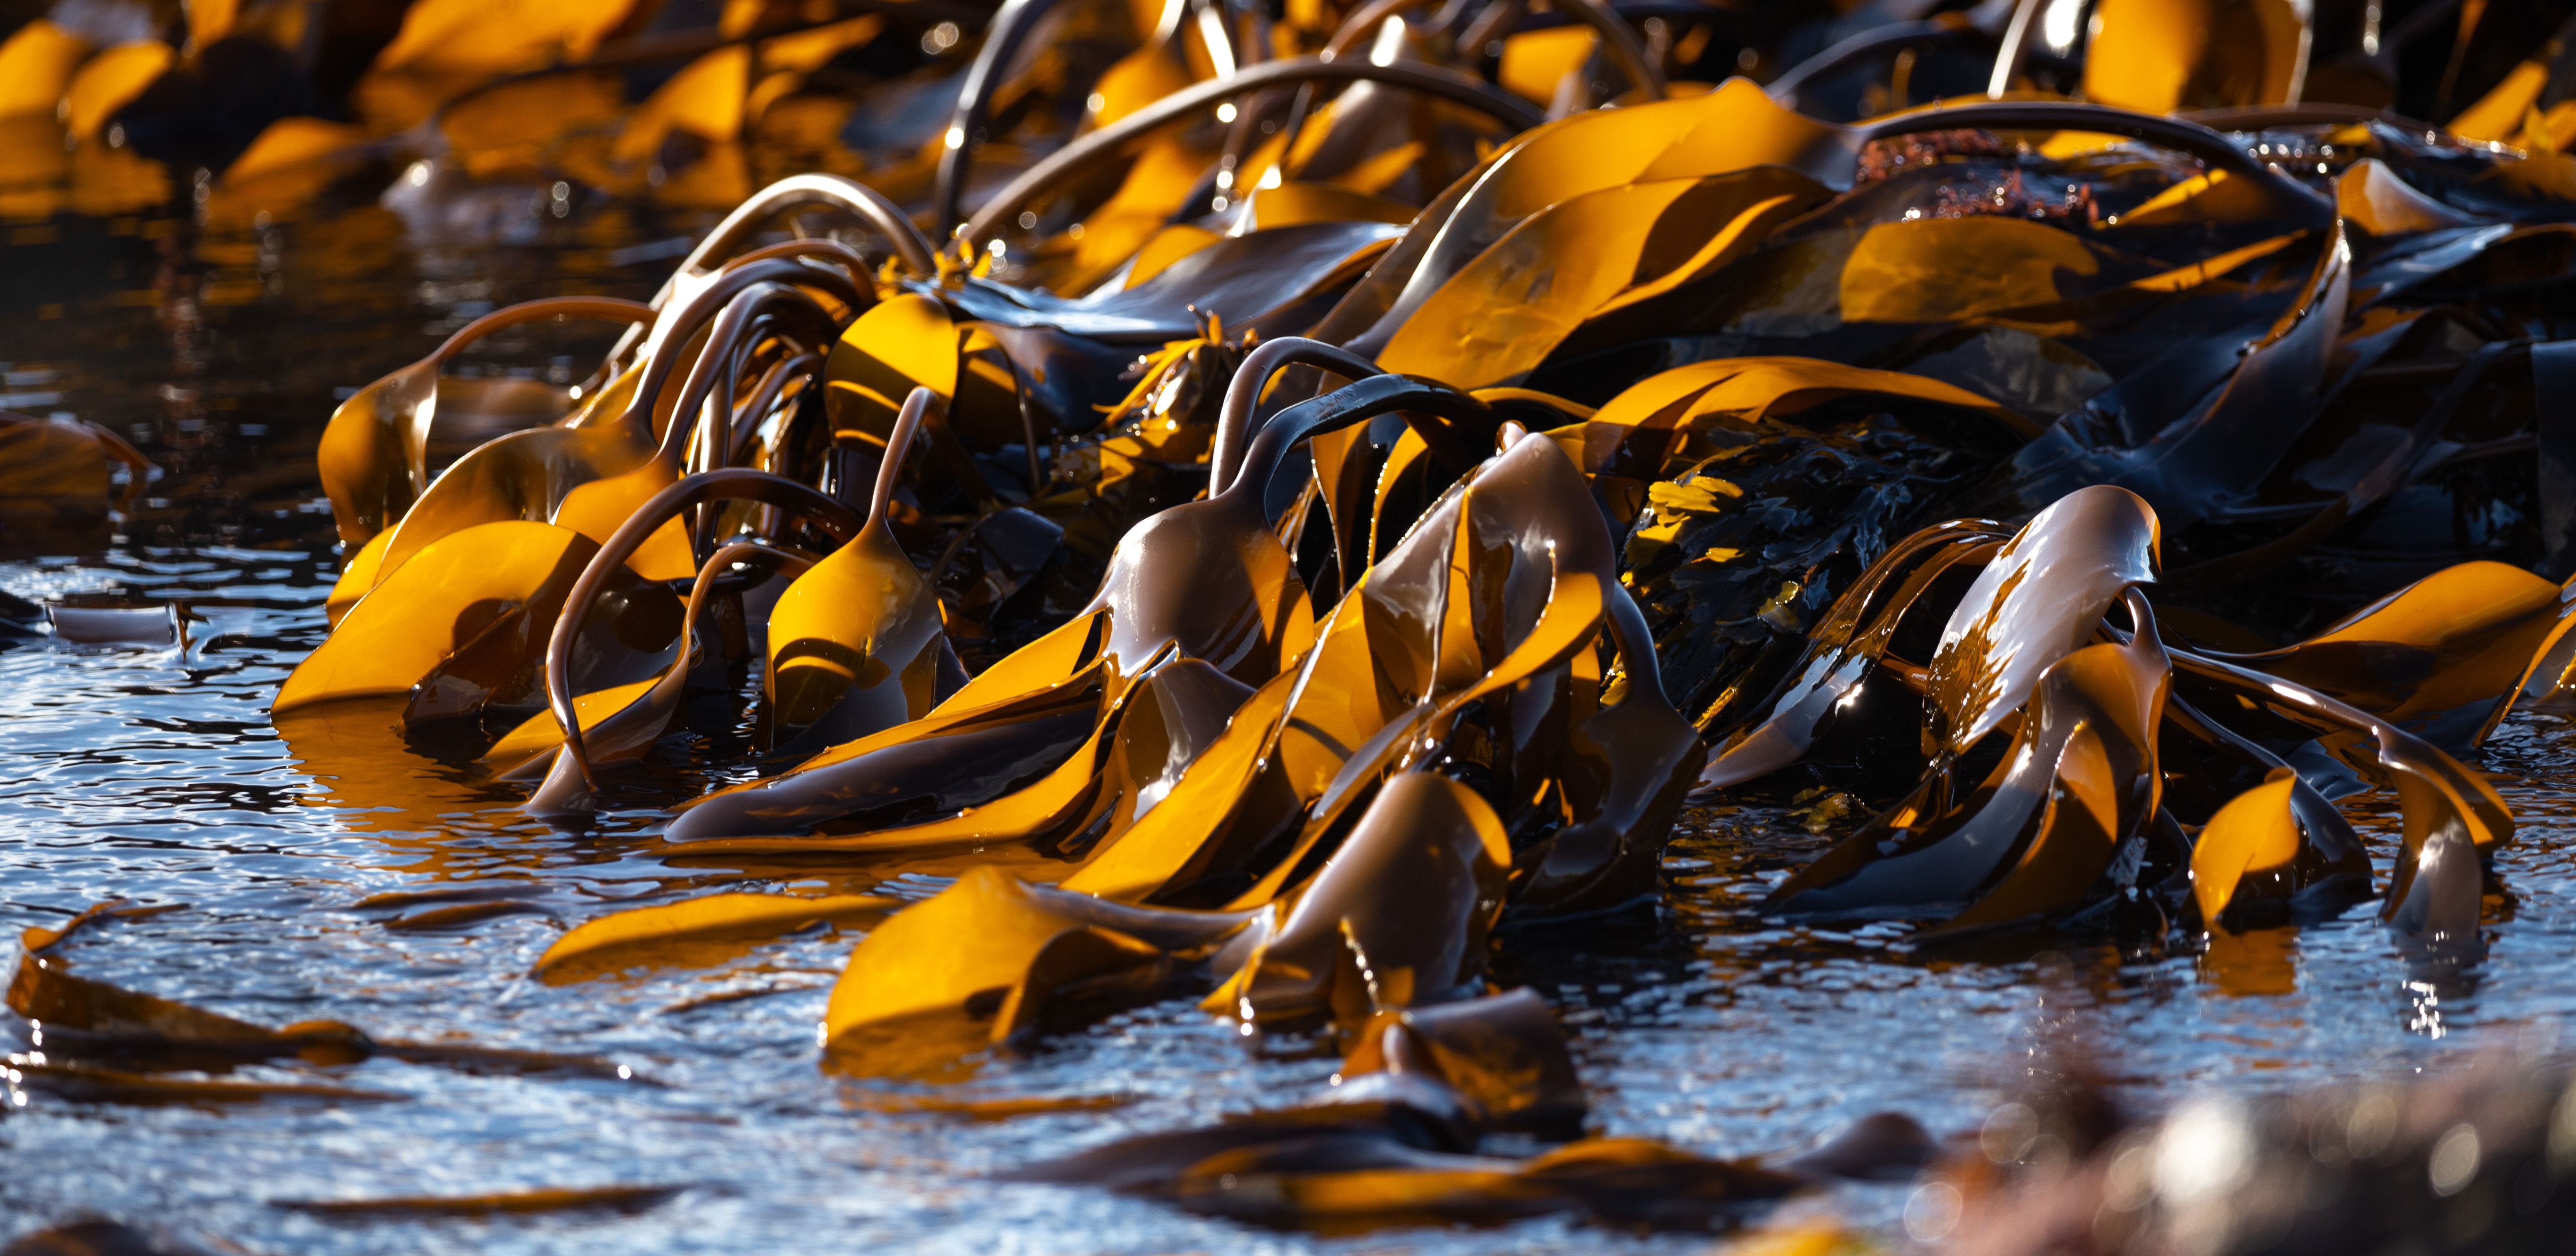 Chilean seaweed extract as a Nutraceutical Supplement with Health Benefits